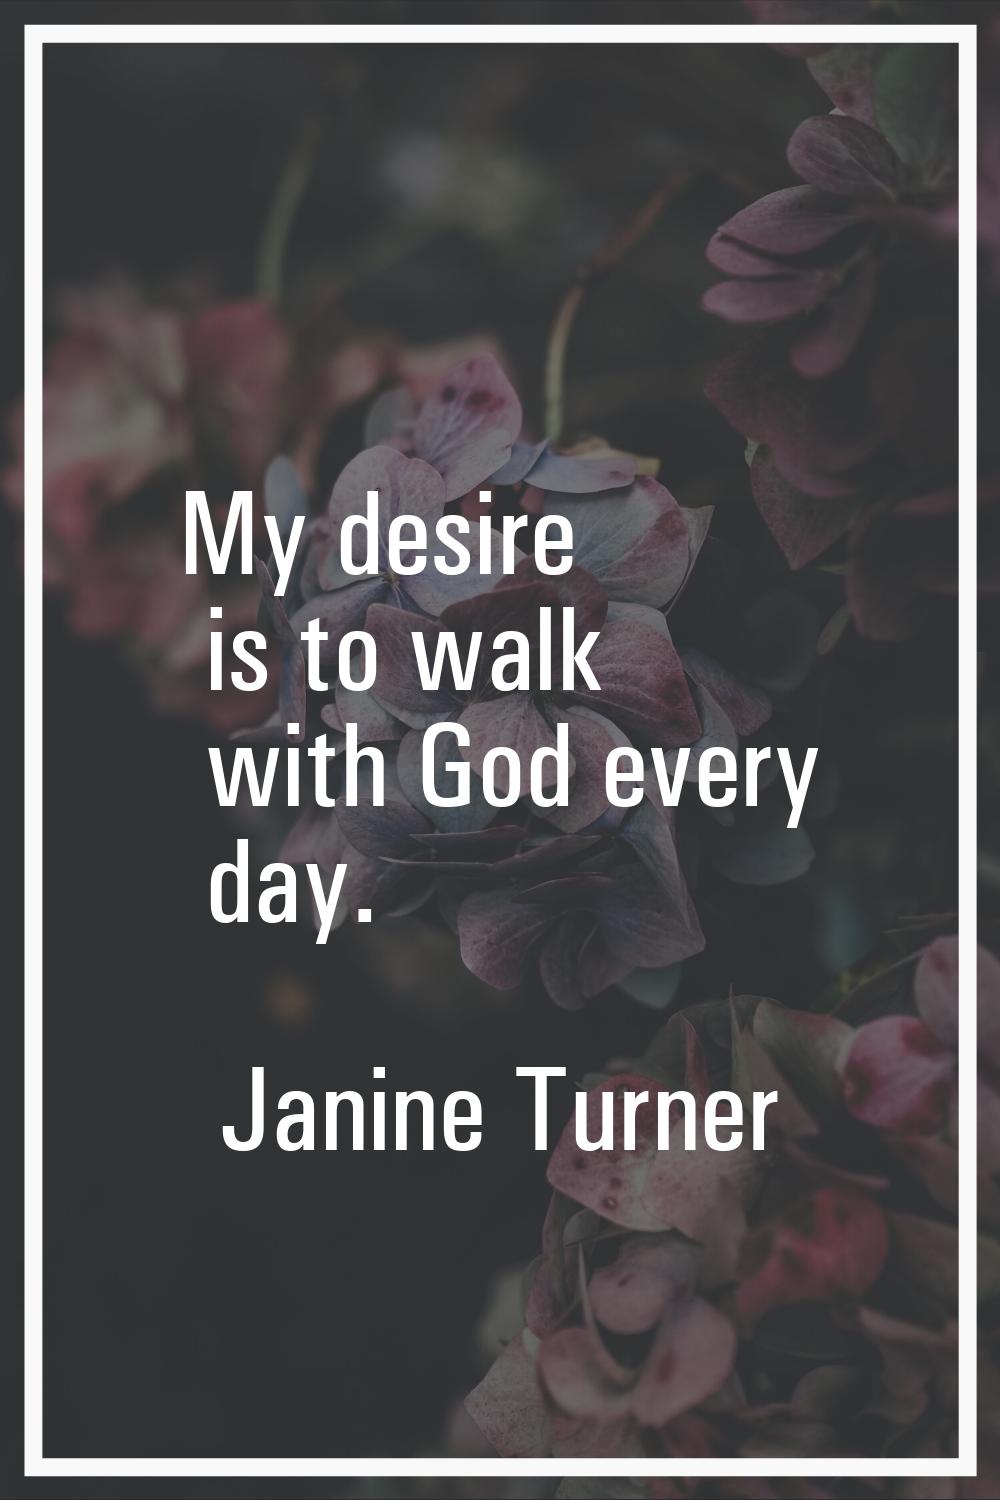 My desire is to walk with God every day.